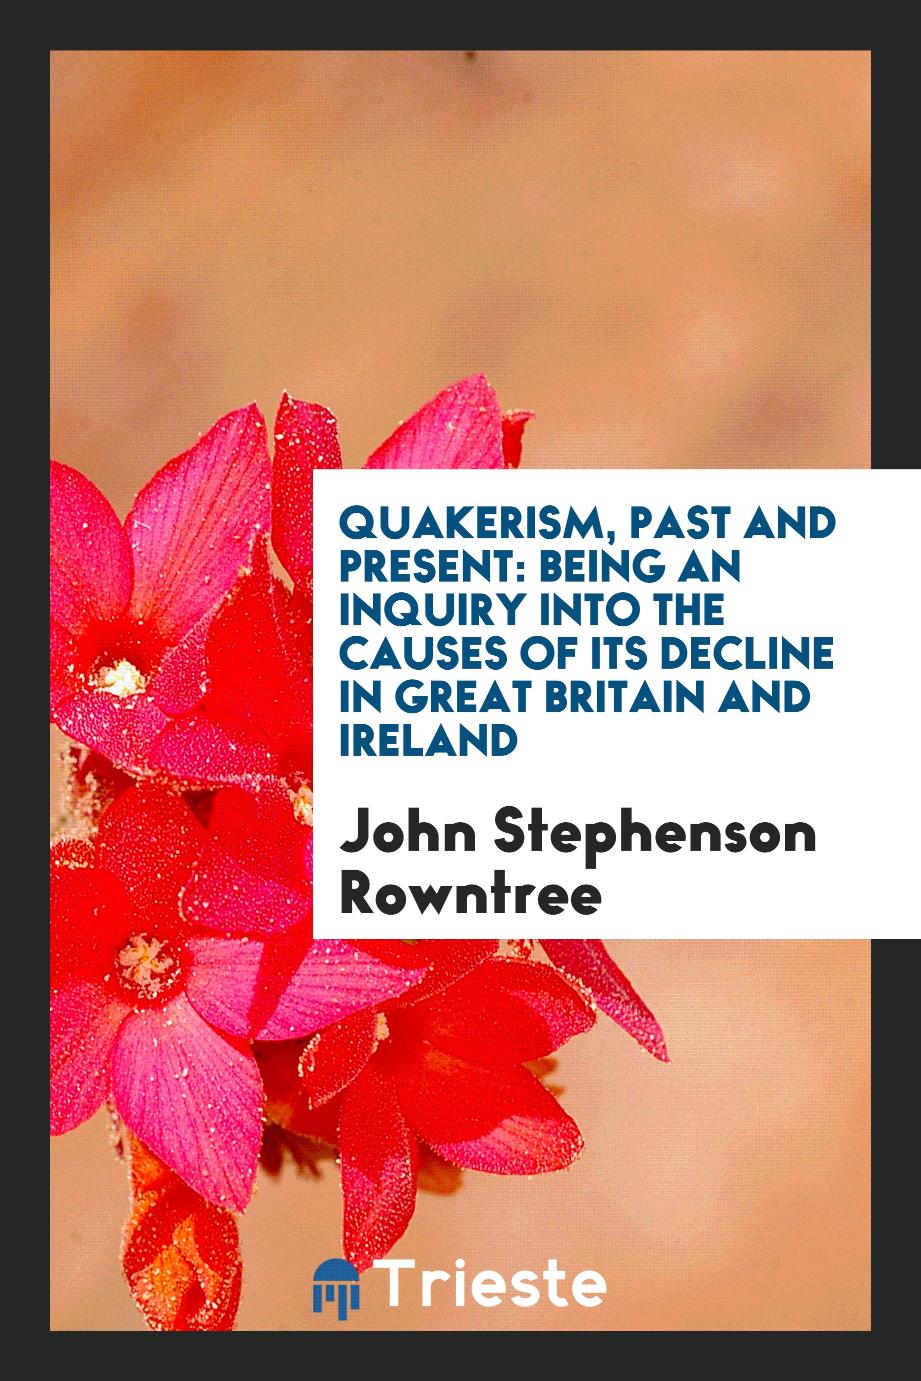 Quakerism, Past and Present: Being an Inquiry into the Causes of Its Decline in Great Britain and Ireland